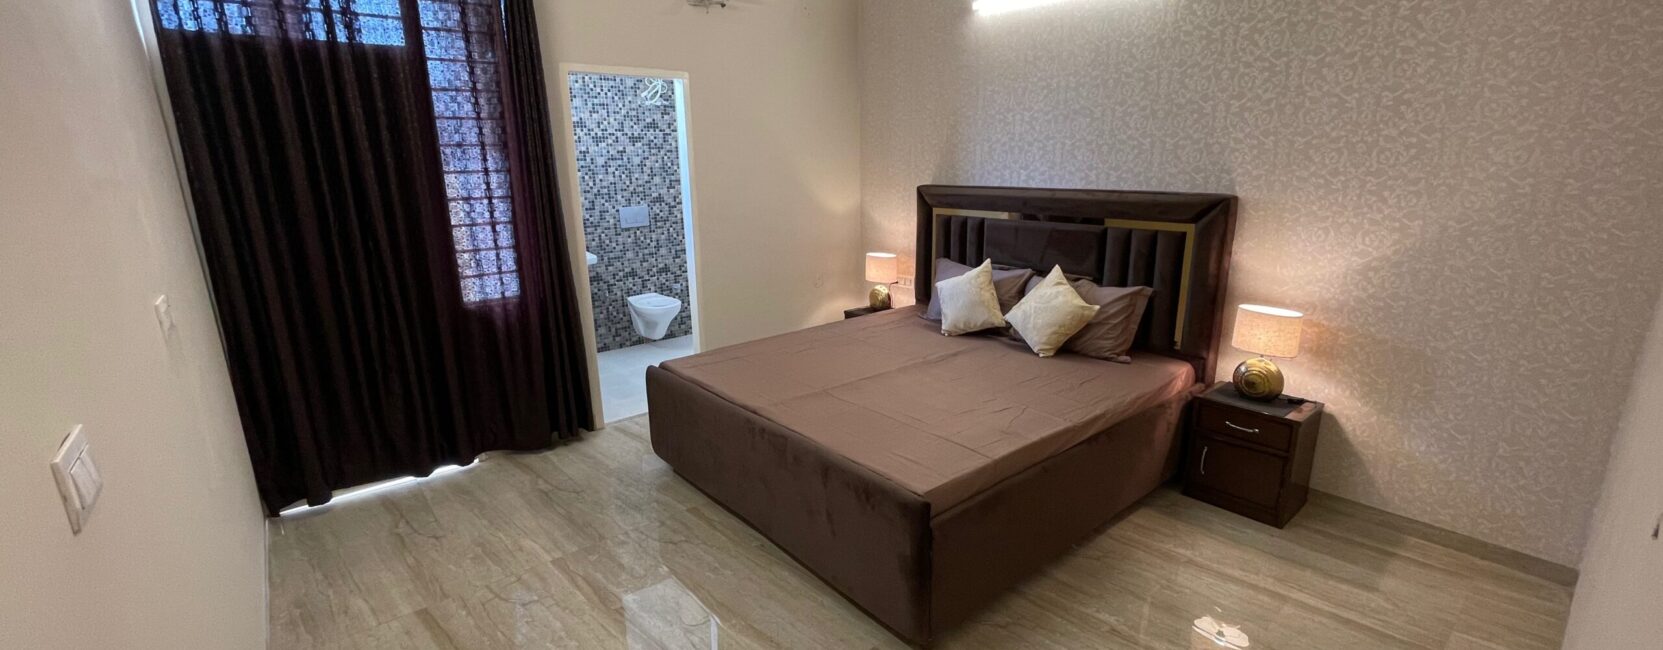 3 BHK INDEPENDENT FLOORS in kharar